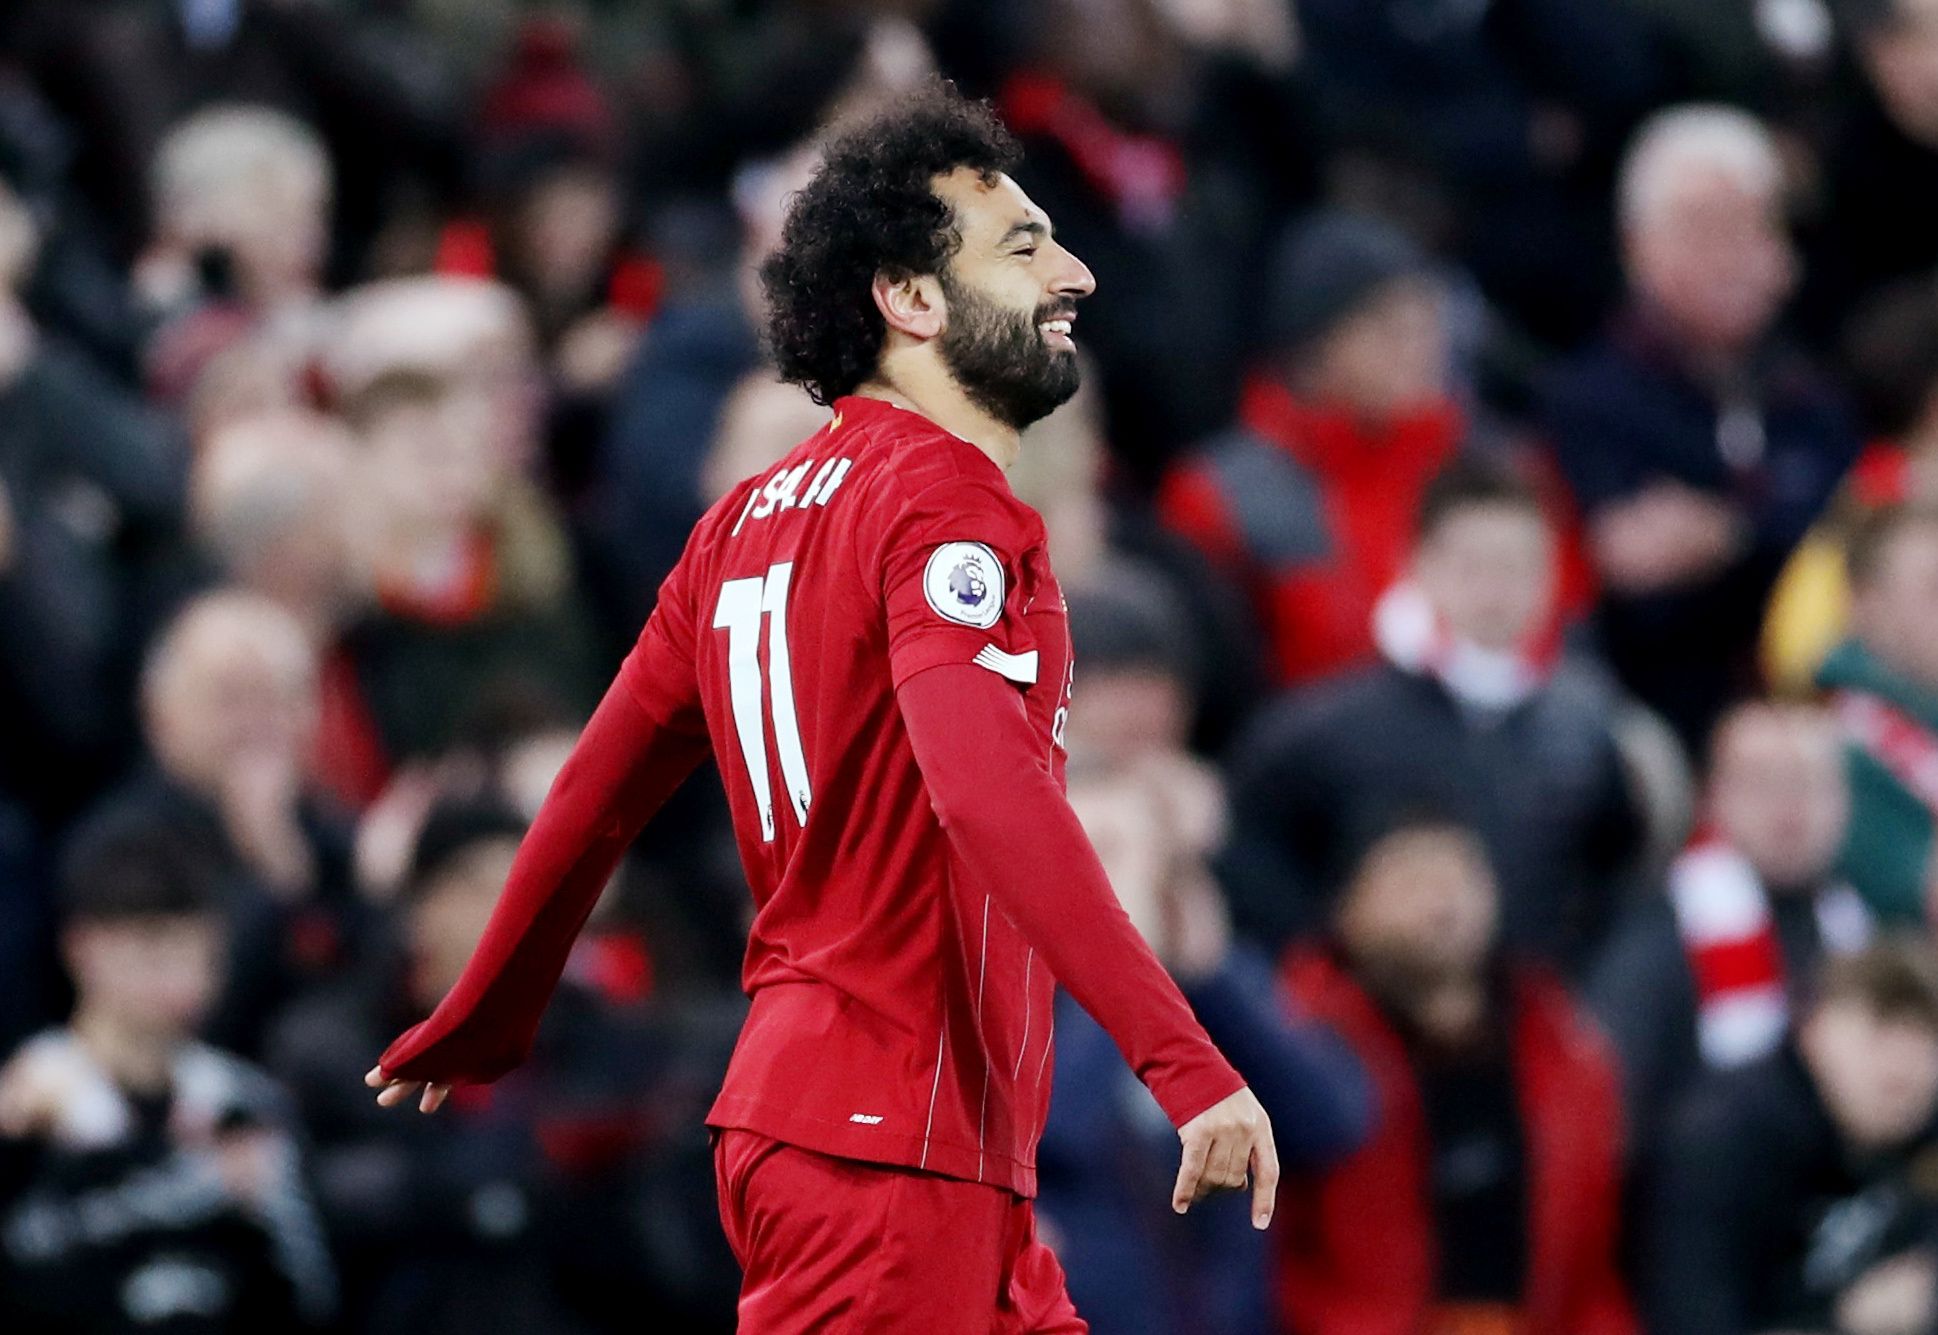 Soccer Football - Premier League - Liverpool v Manchester City - Anfield, Liverpool, Britain - November 10, 2019  Liverpool's Mohamed Salah celebrates scoring their second goal   Action Images via Reuters/Carl Recine  EDITORIAL USE ONLY. No use with unauthorized audio, video, data, fixture lists, club/league logos or 